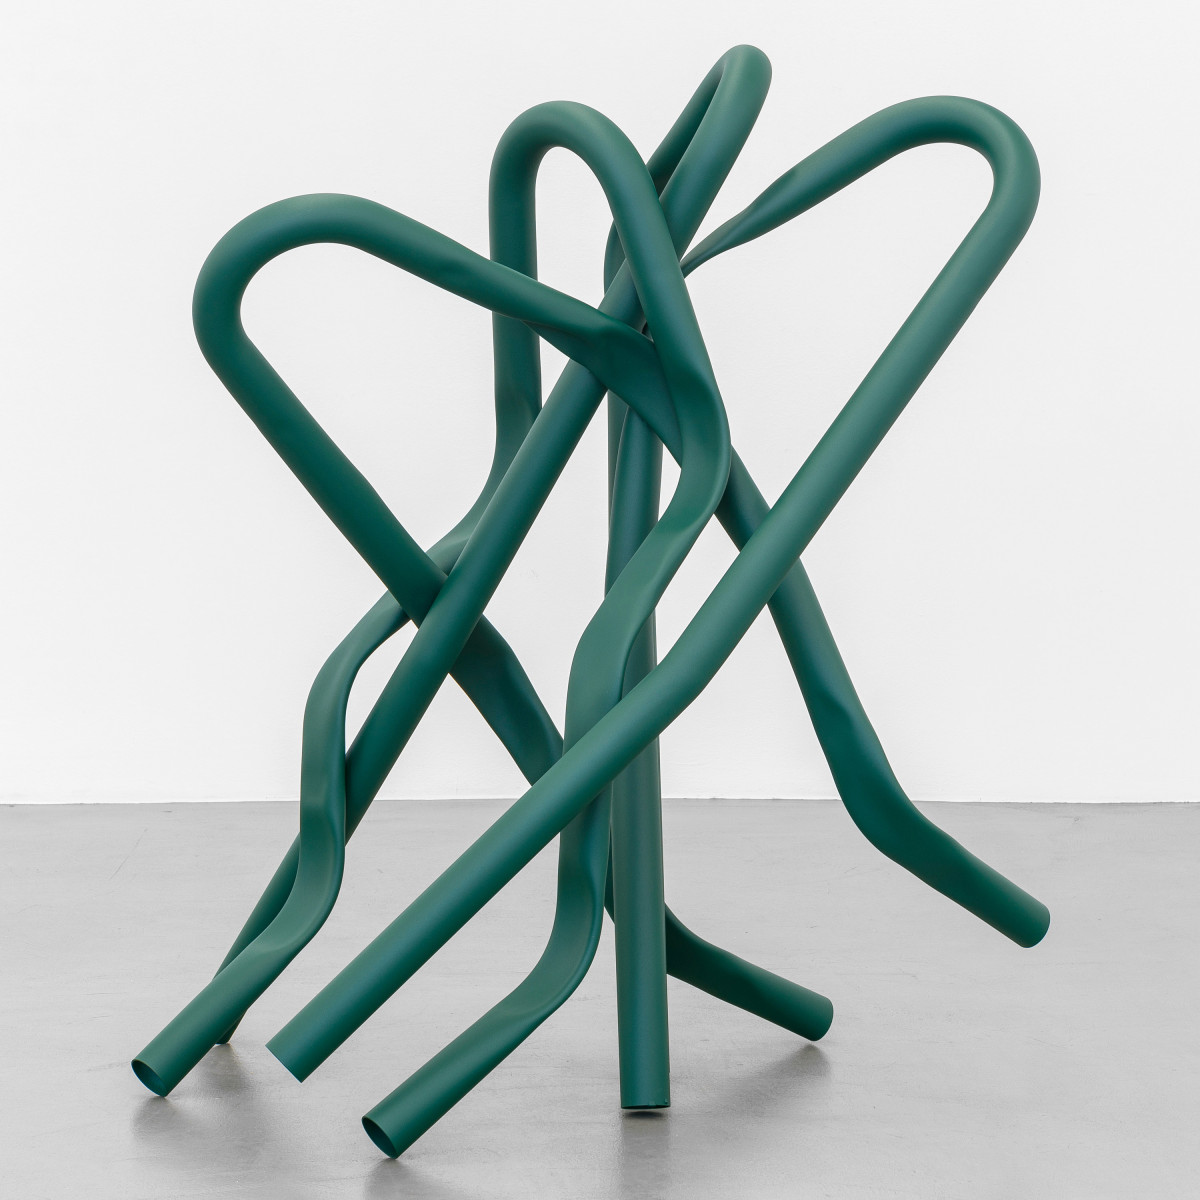 Bettina Pousttchi, ‘David’, 2019, Tree protection barriers, stainless steel